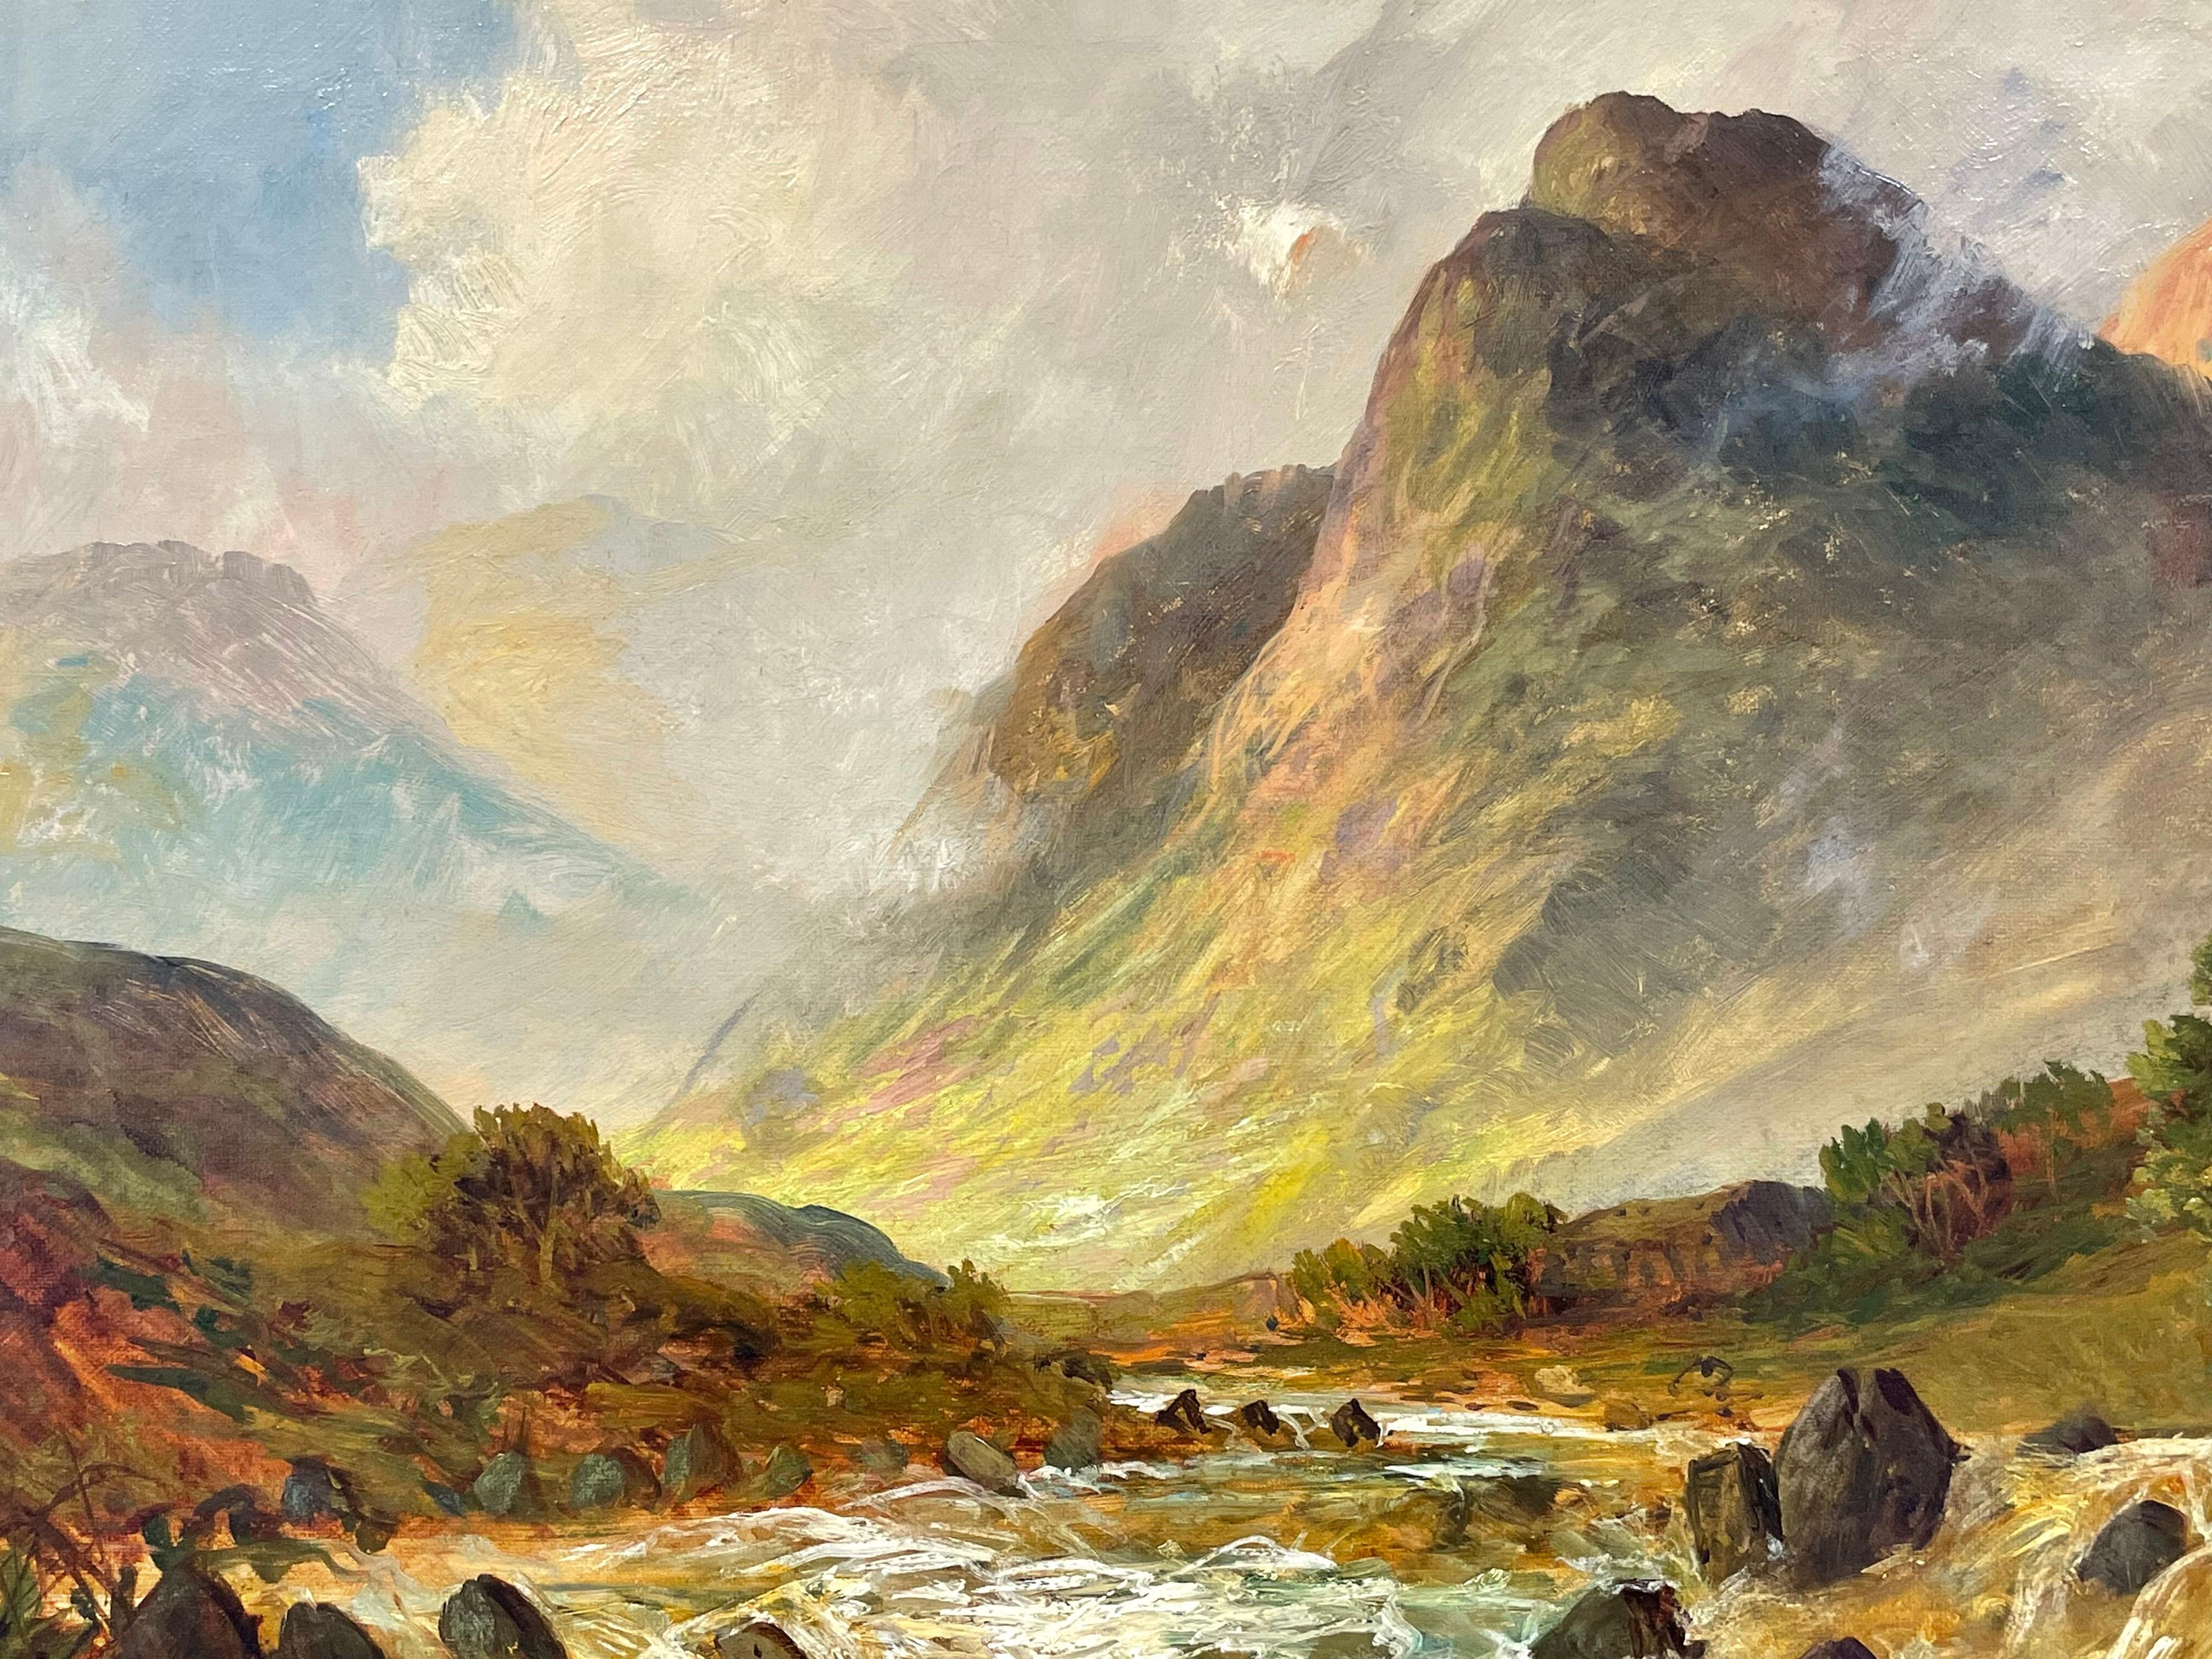 Antique Scottish Highlands Oil Painting Sunrise River Landscape with Mountains - Brown Figurative Painting by Francis E. Jamieson